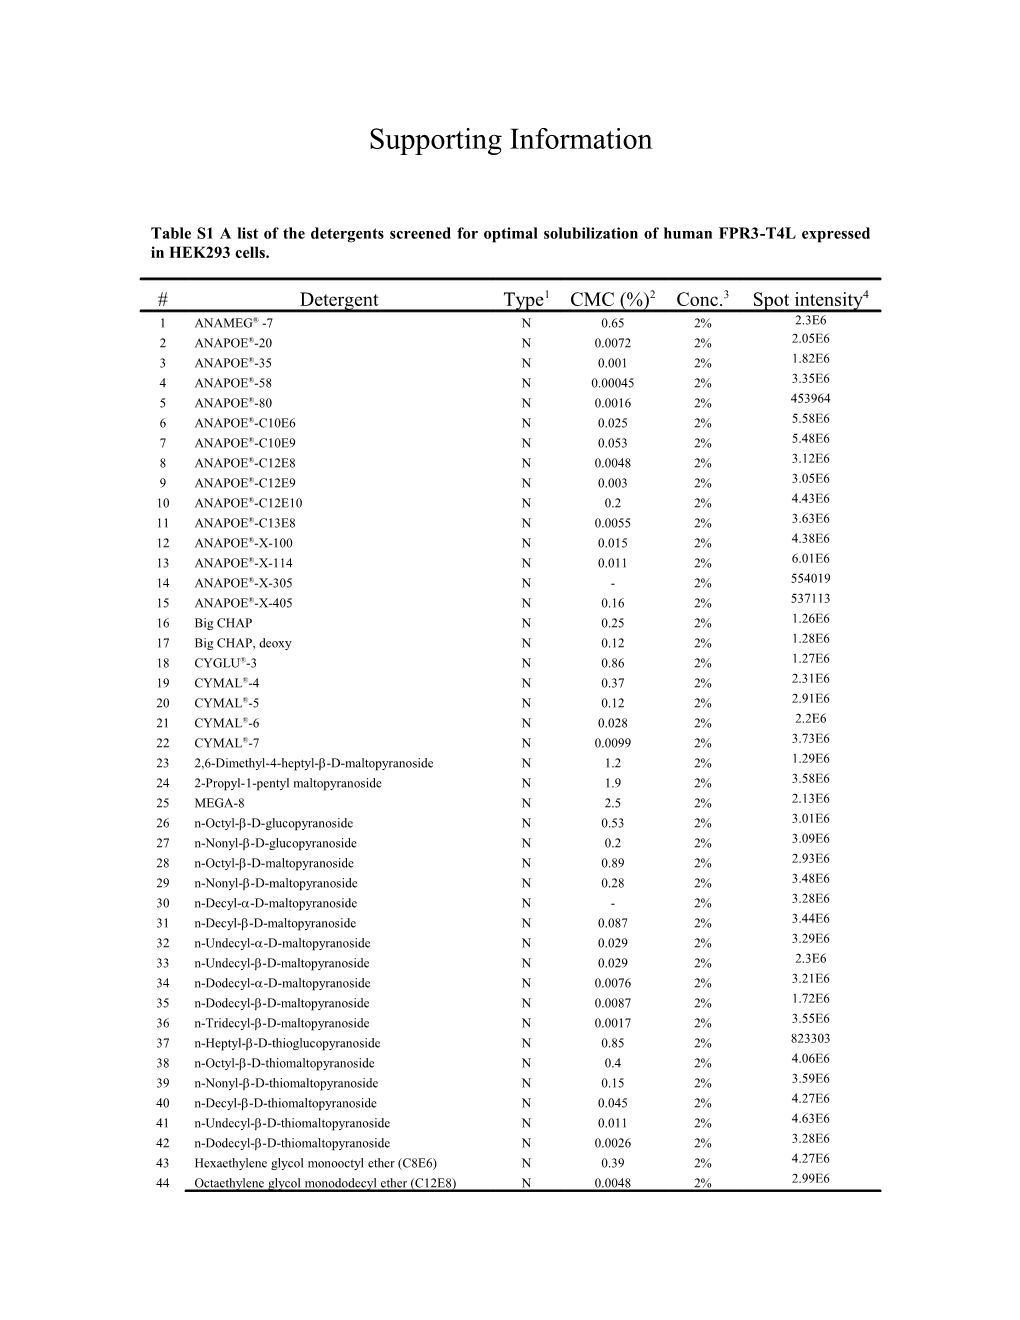 Table S1A List of the Detergents Screened for Optimal Solubilization of Human FPR3-T4L